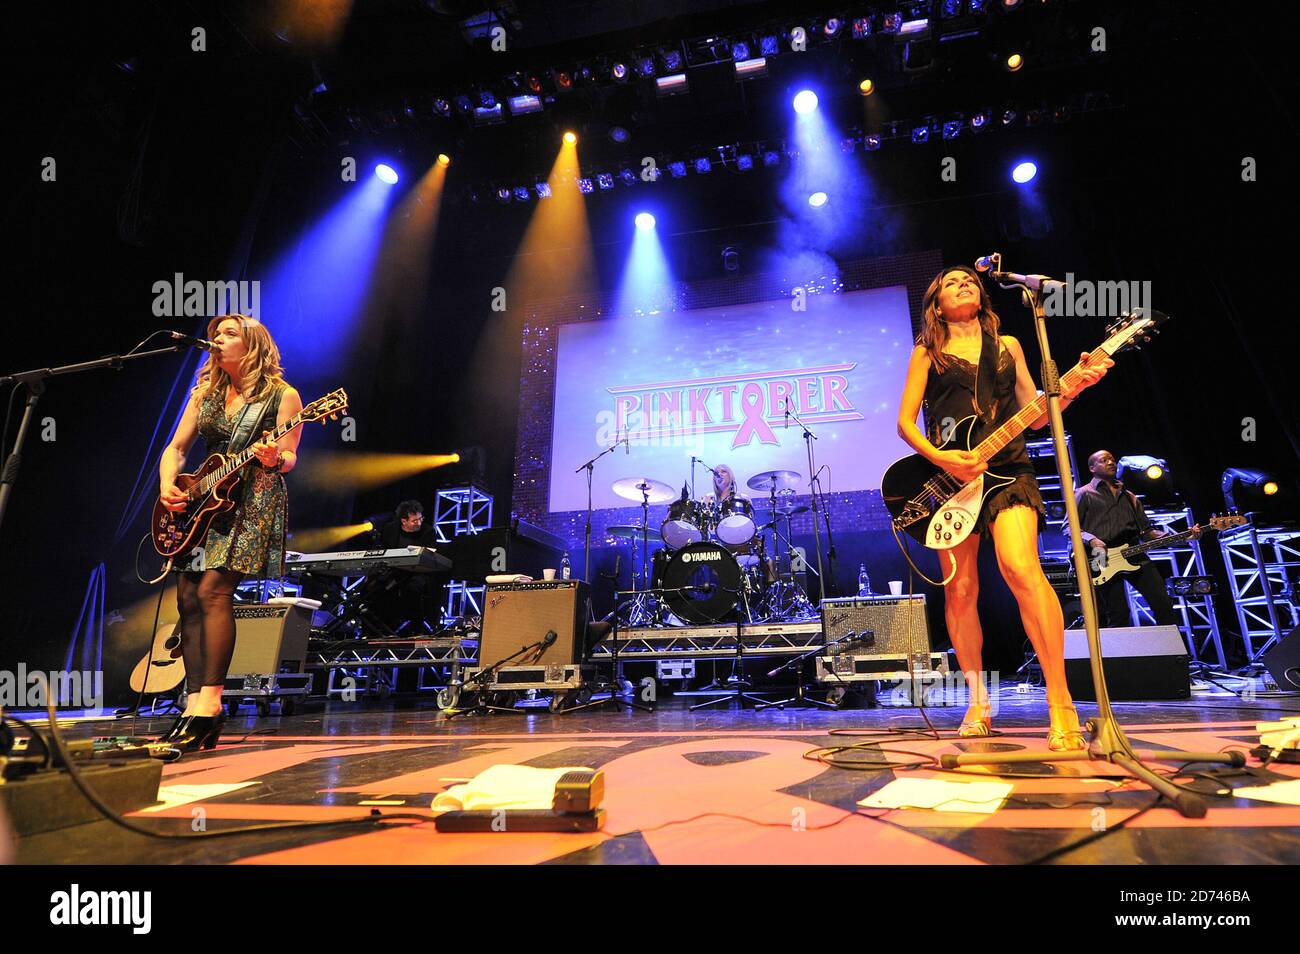 The Bangles perform at the Hard Rock Pinktober concert, at the IndigO2 venue in east London.  Stock Photo